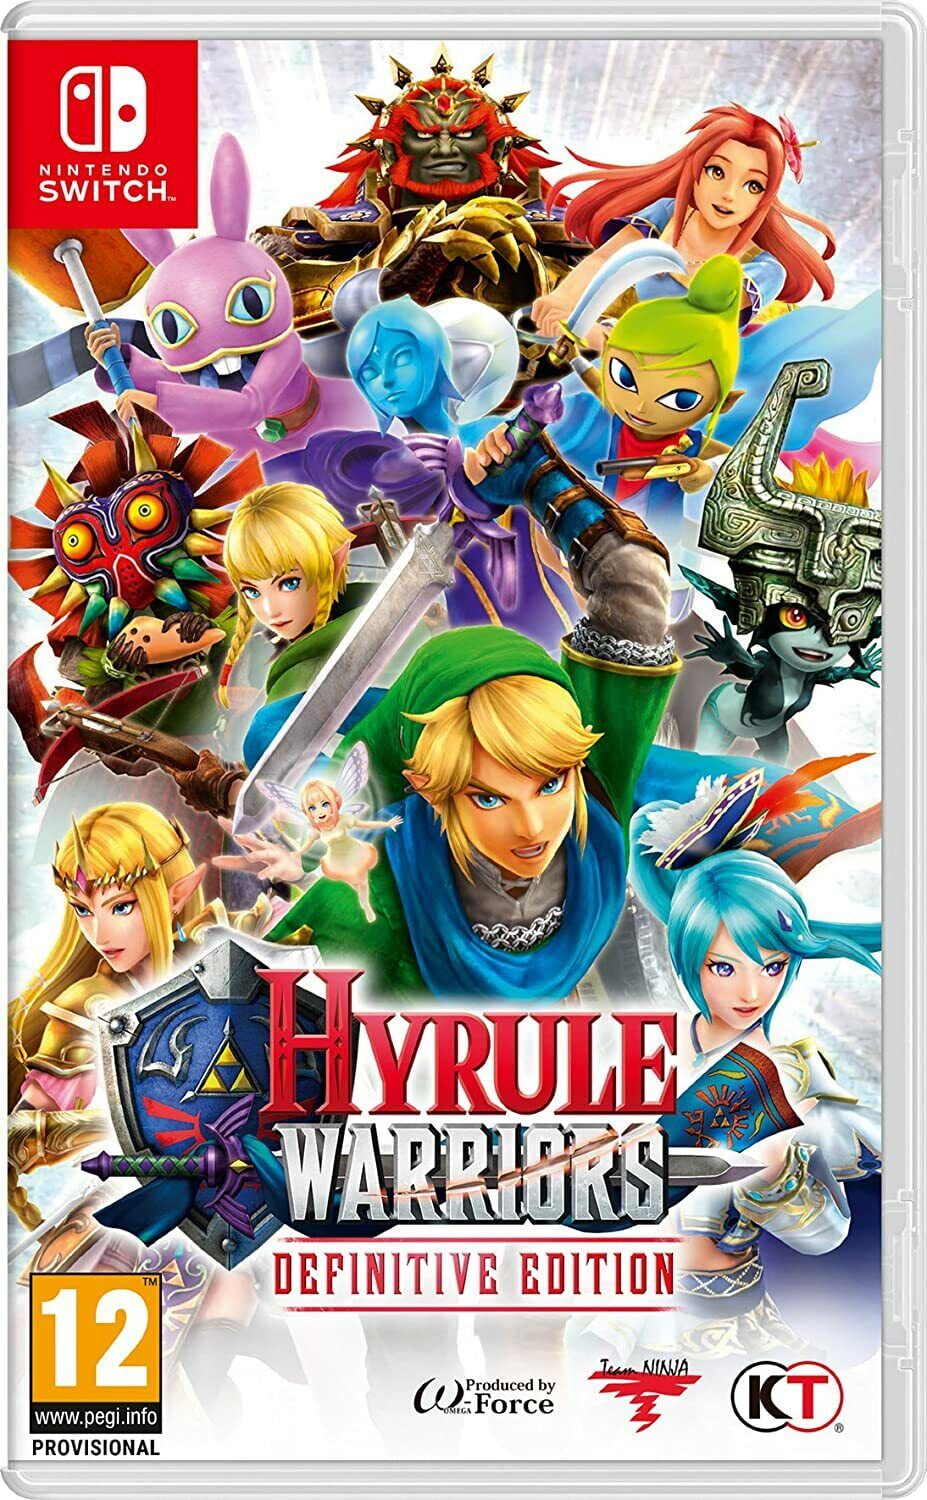 NEW! SEALED! Hyrule Warriors: Definitive Edition (Nintendo Switch